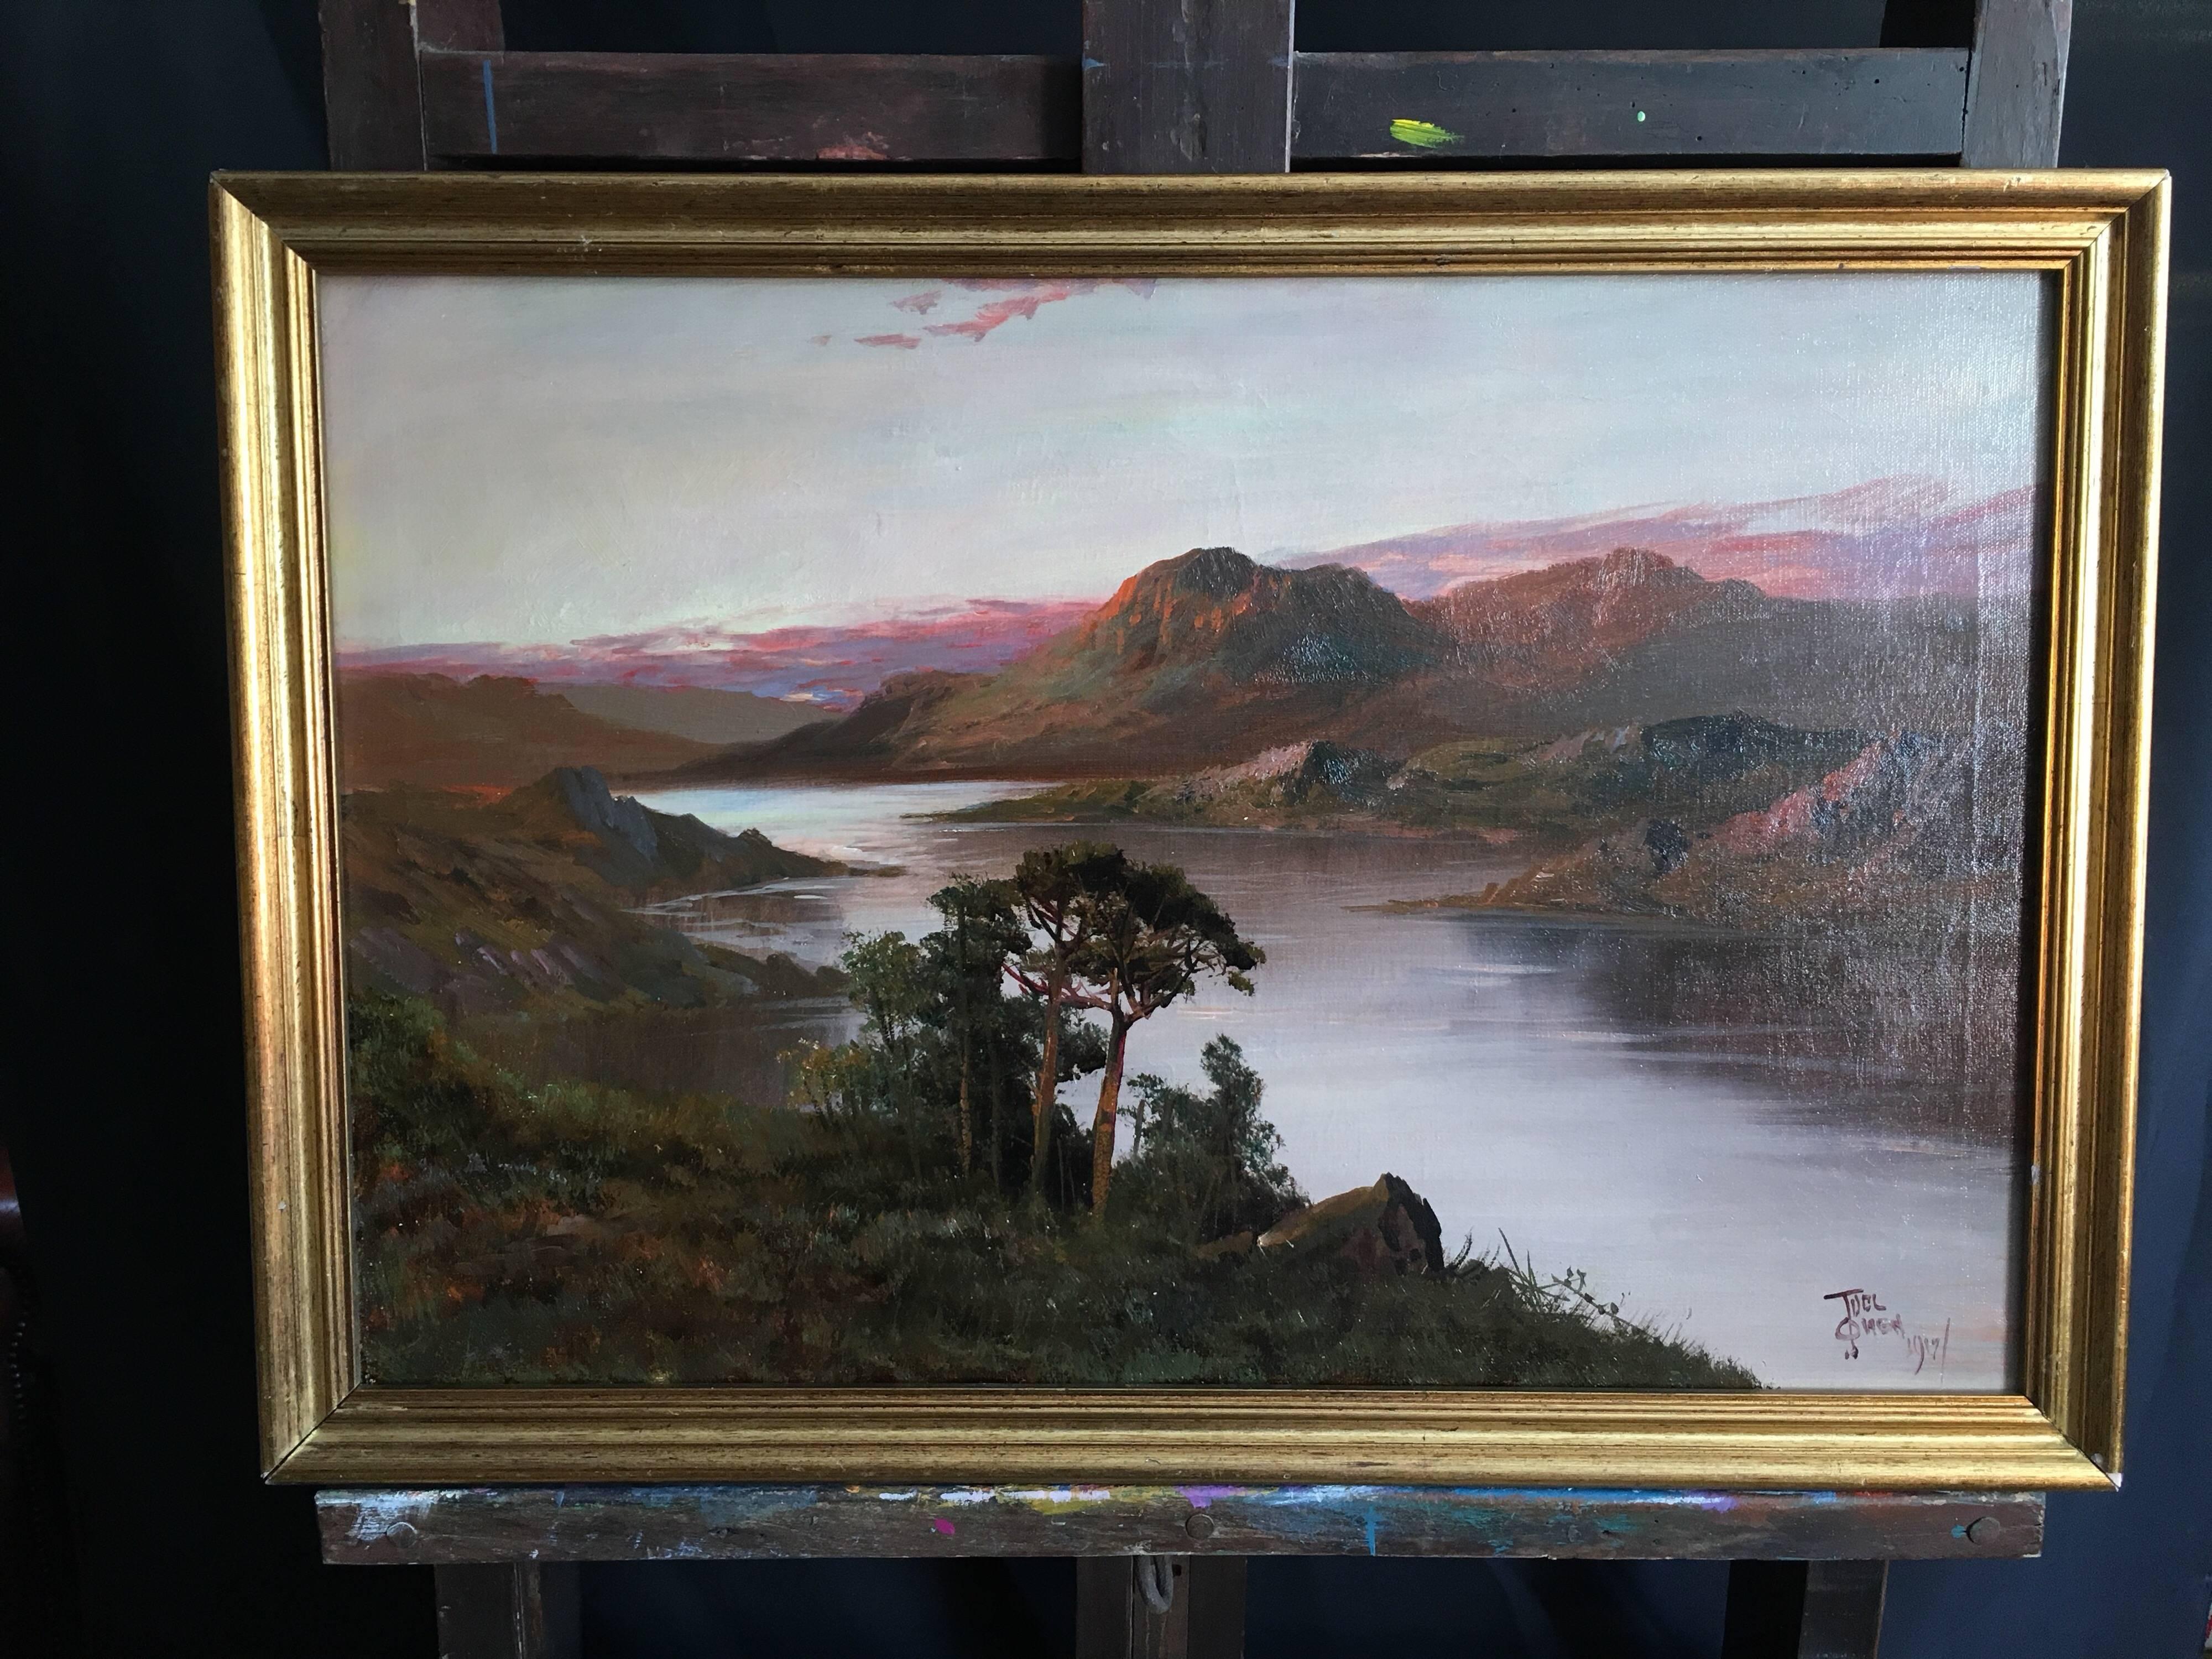 Antique Large Landscape of Scotland, Sunset, Signed - Painting by Francis E. Jamieson